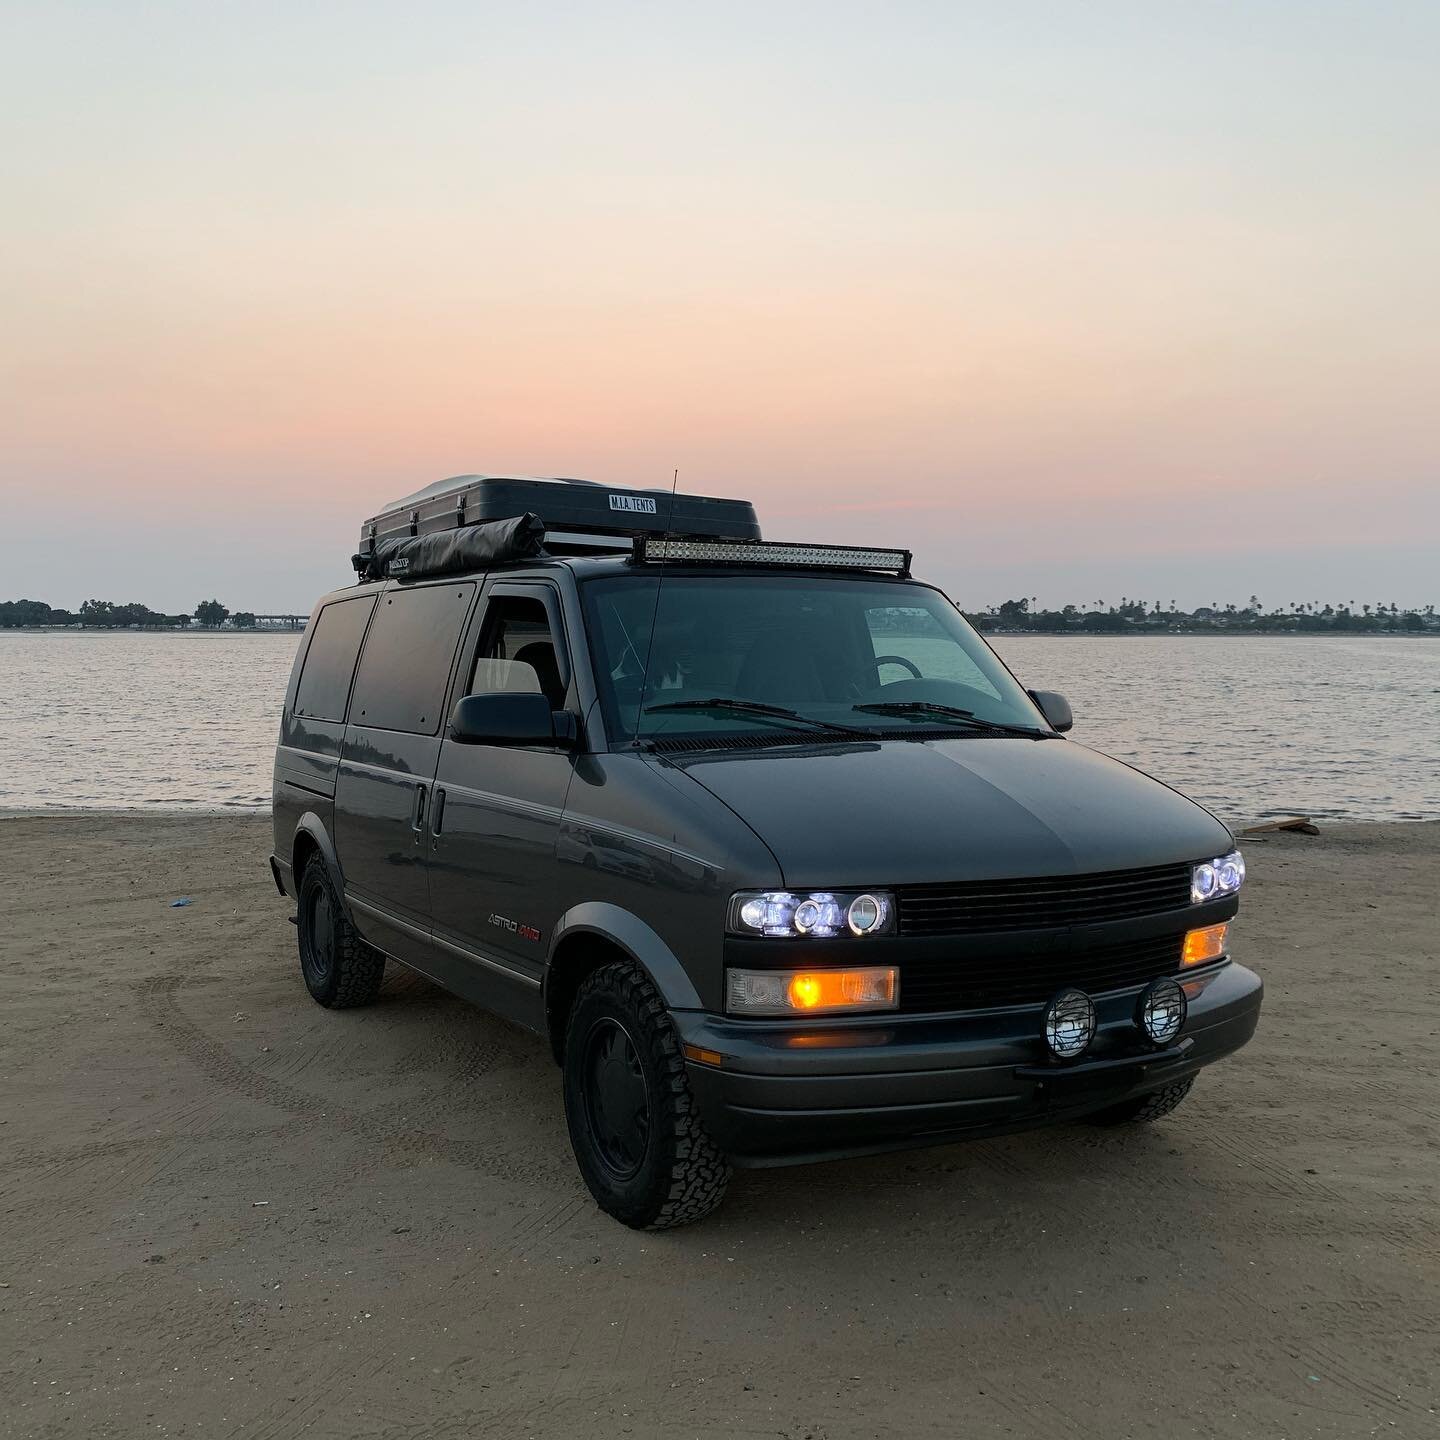 New Build Alert 🚨 Completed ✔️ All Wheel Drive Astro Van with inside and outside luxury. Solar, power, sink, storage. Check the before and after photos. This thing is catered to off-road luxury or a stealthy cozy night in a neighborhood 🚐💨 #astrov